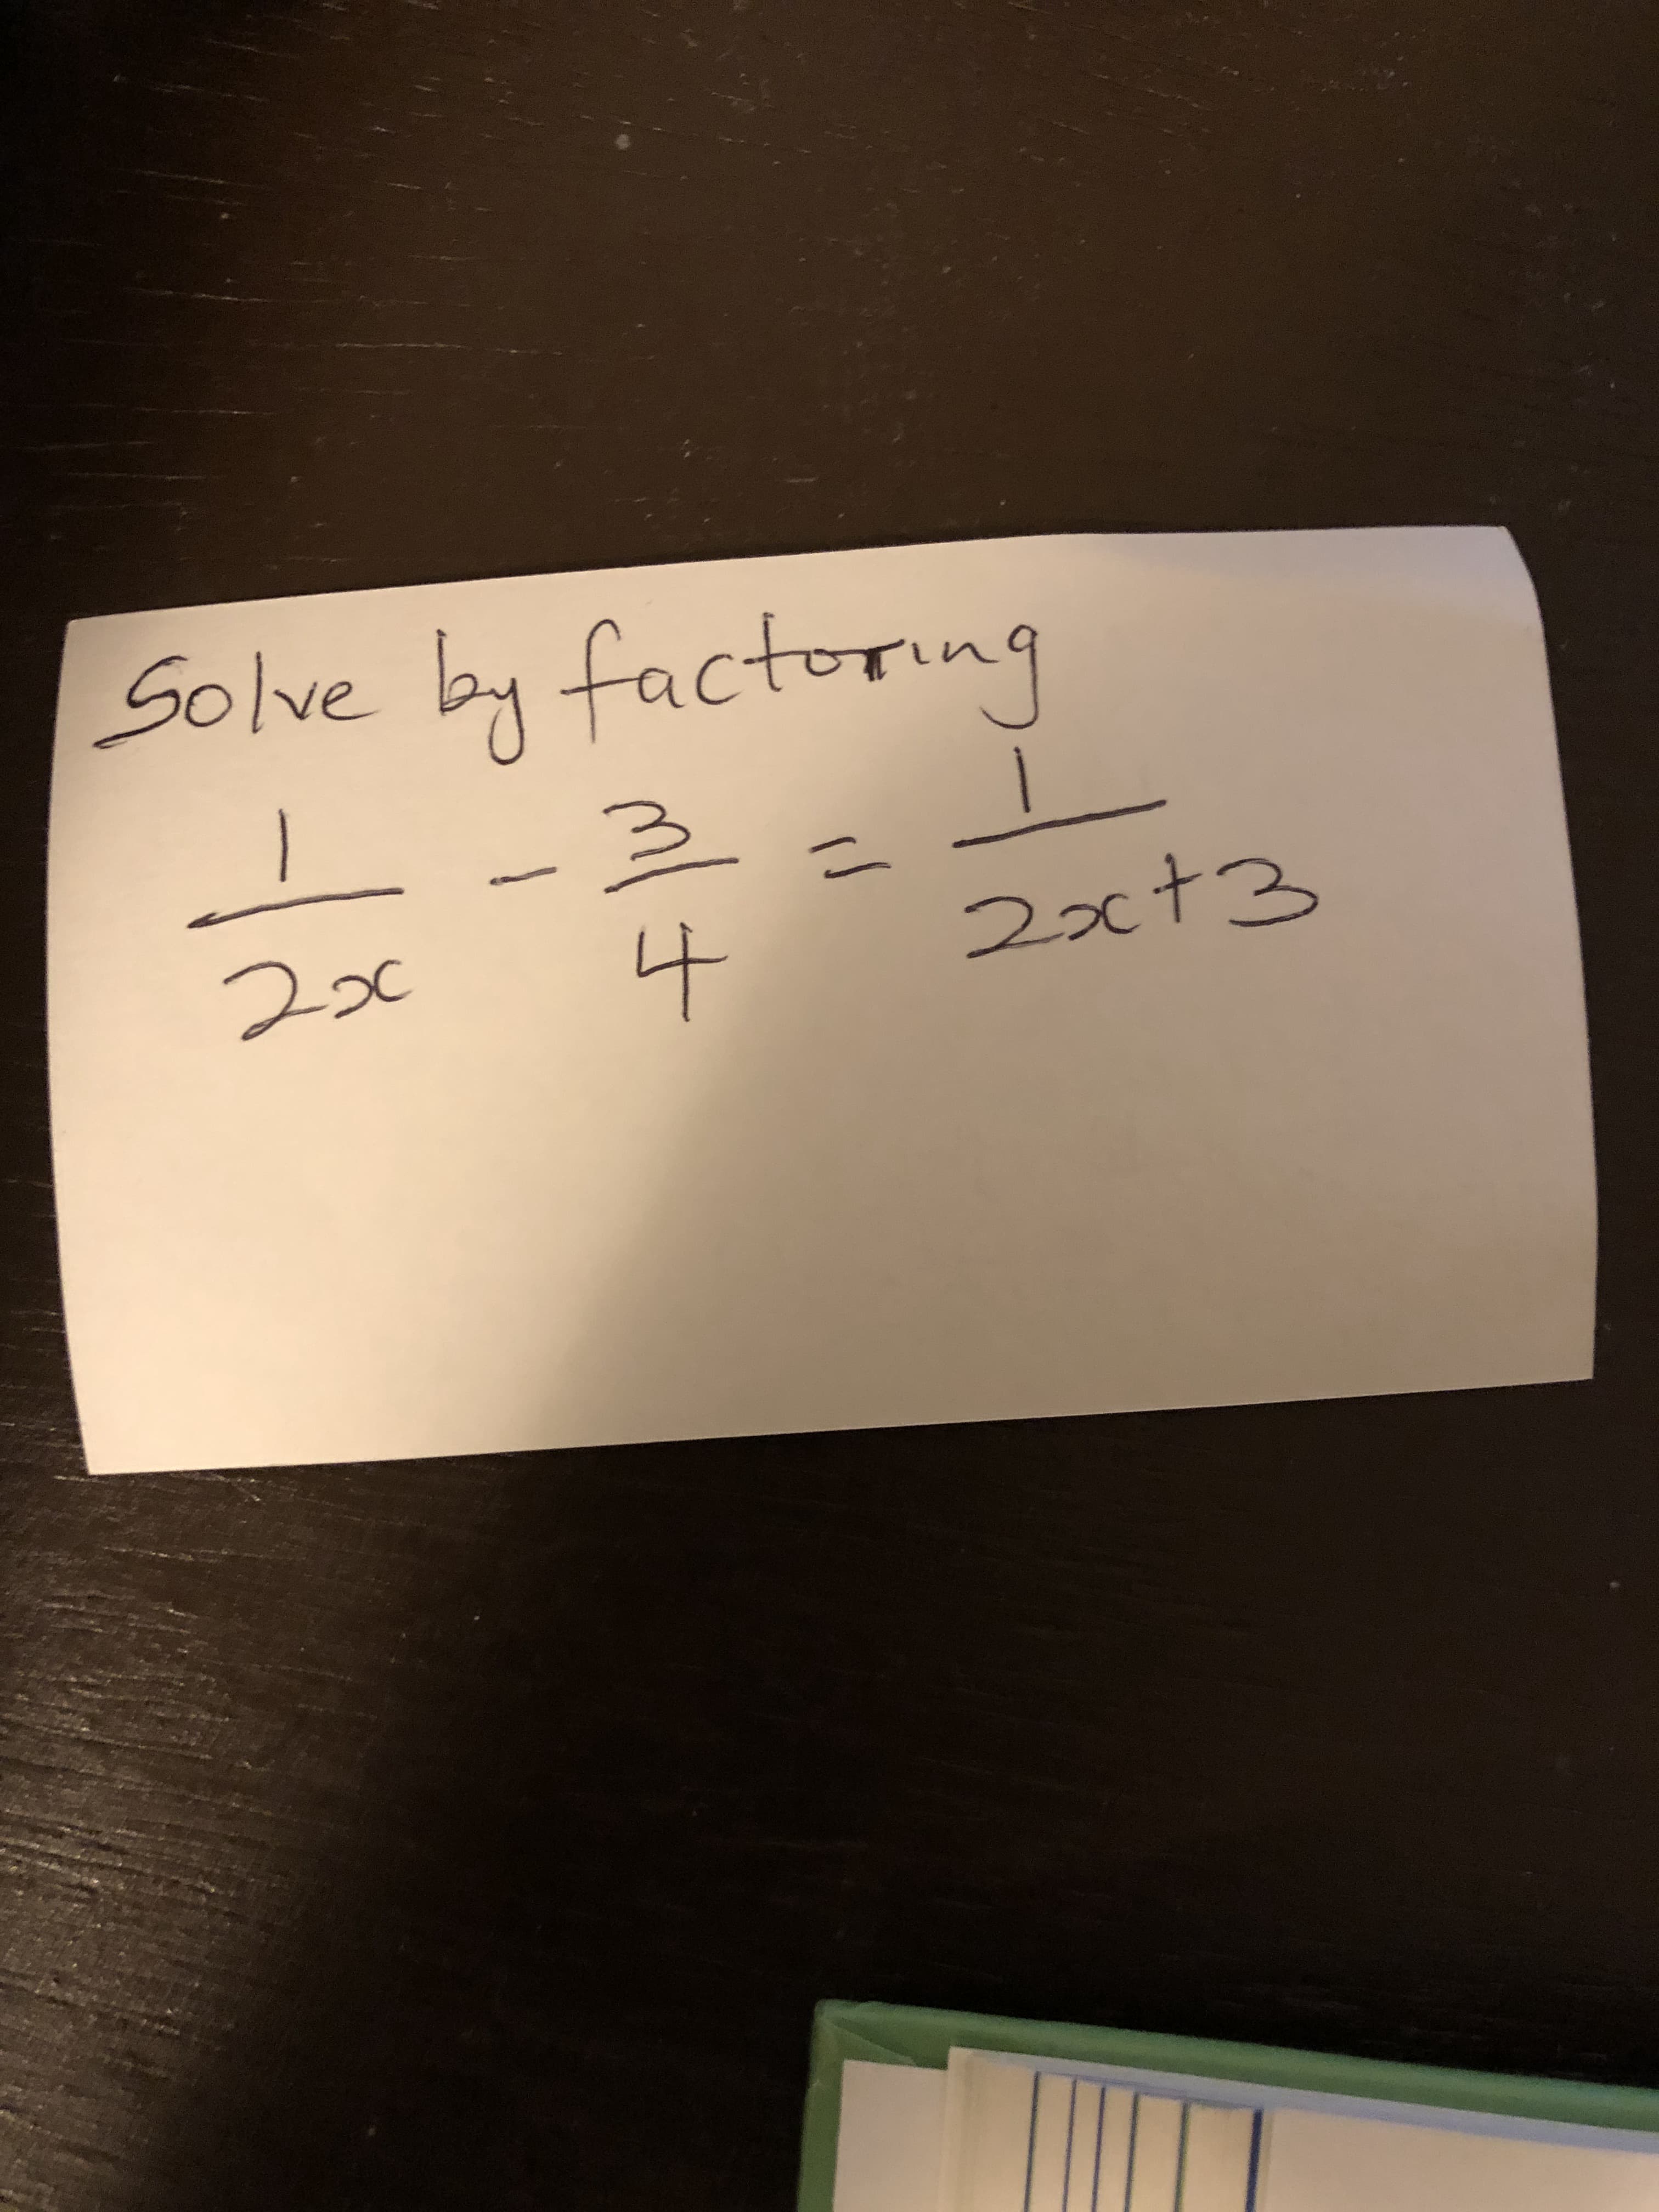 Solve by factoring
二
4
2xt3
